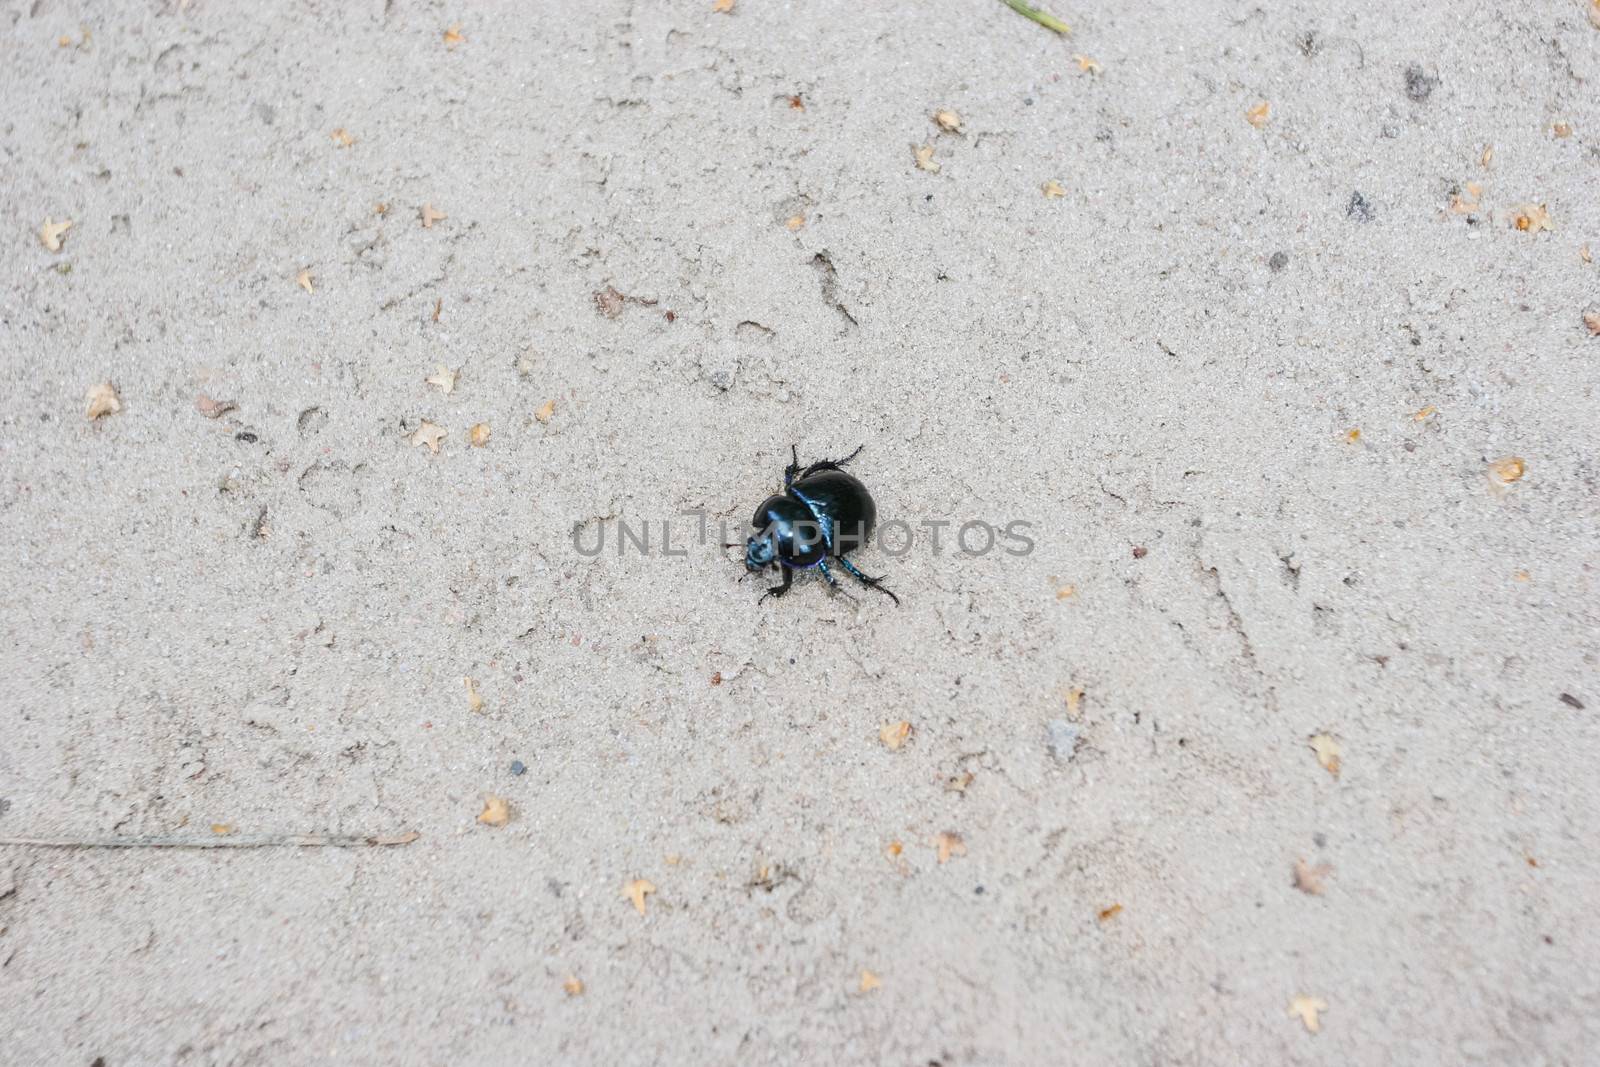 Beetle is weakly lustrous and darkly colored, sometimes with a bluish sheen. The body shape is very compact and arched toward the top.